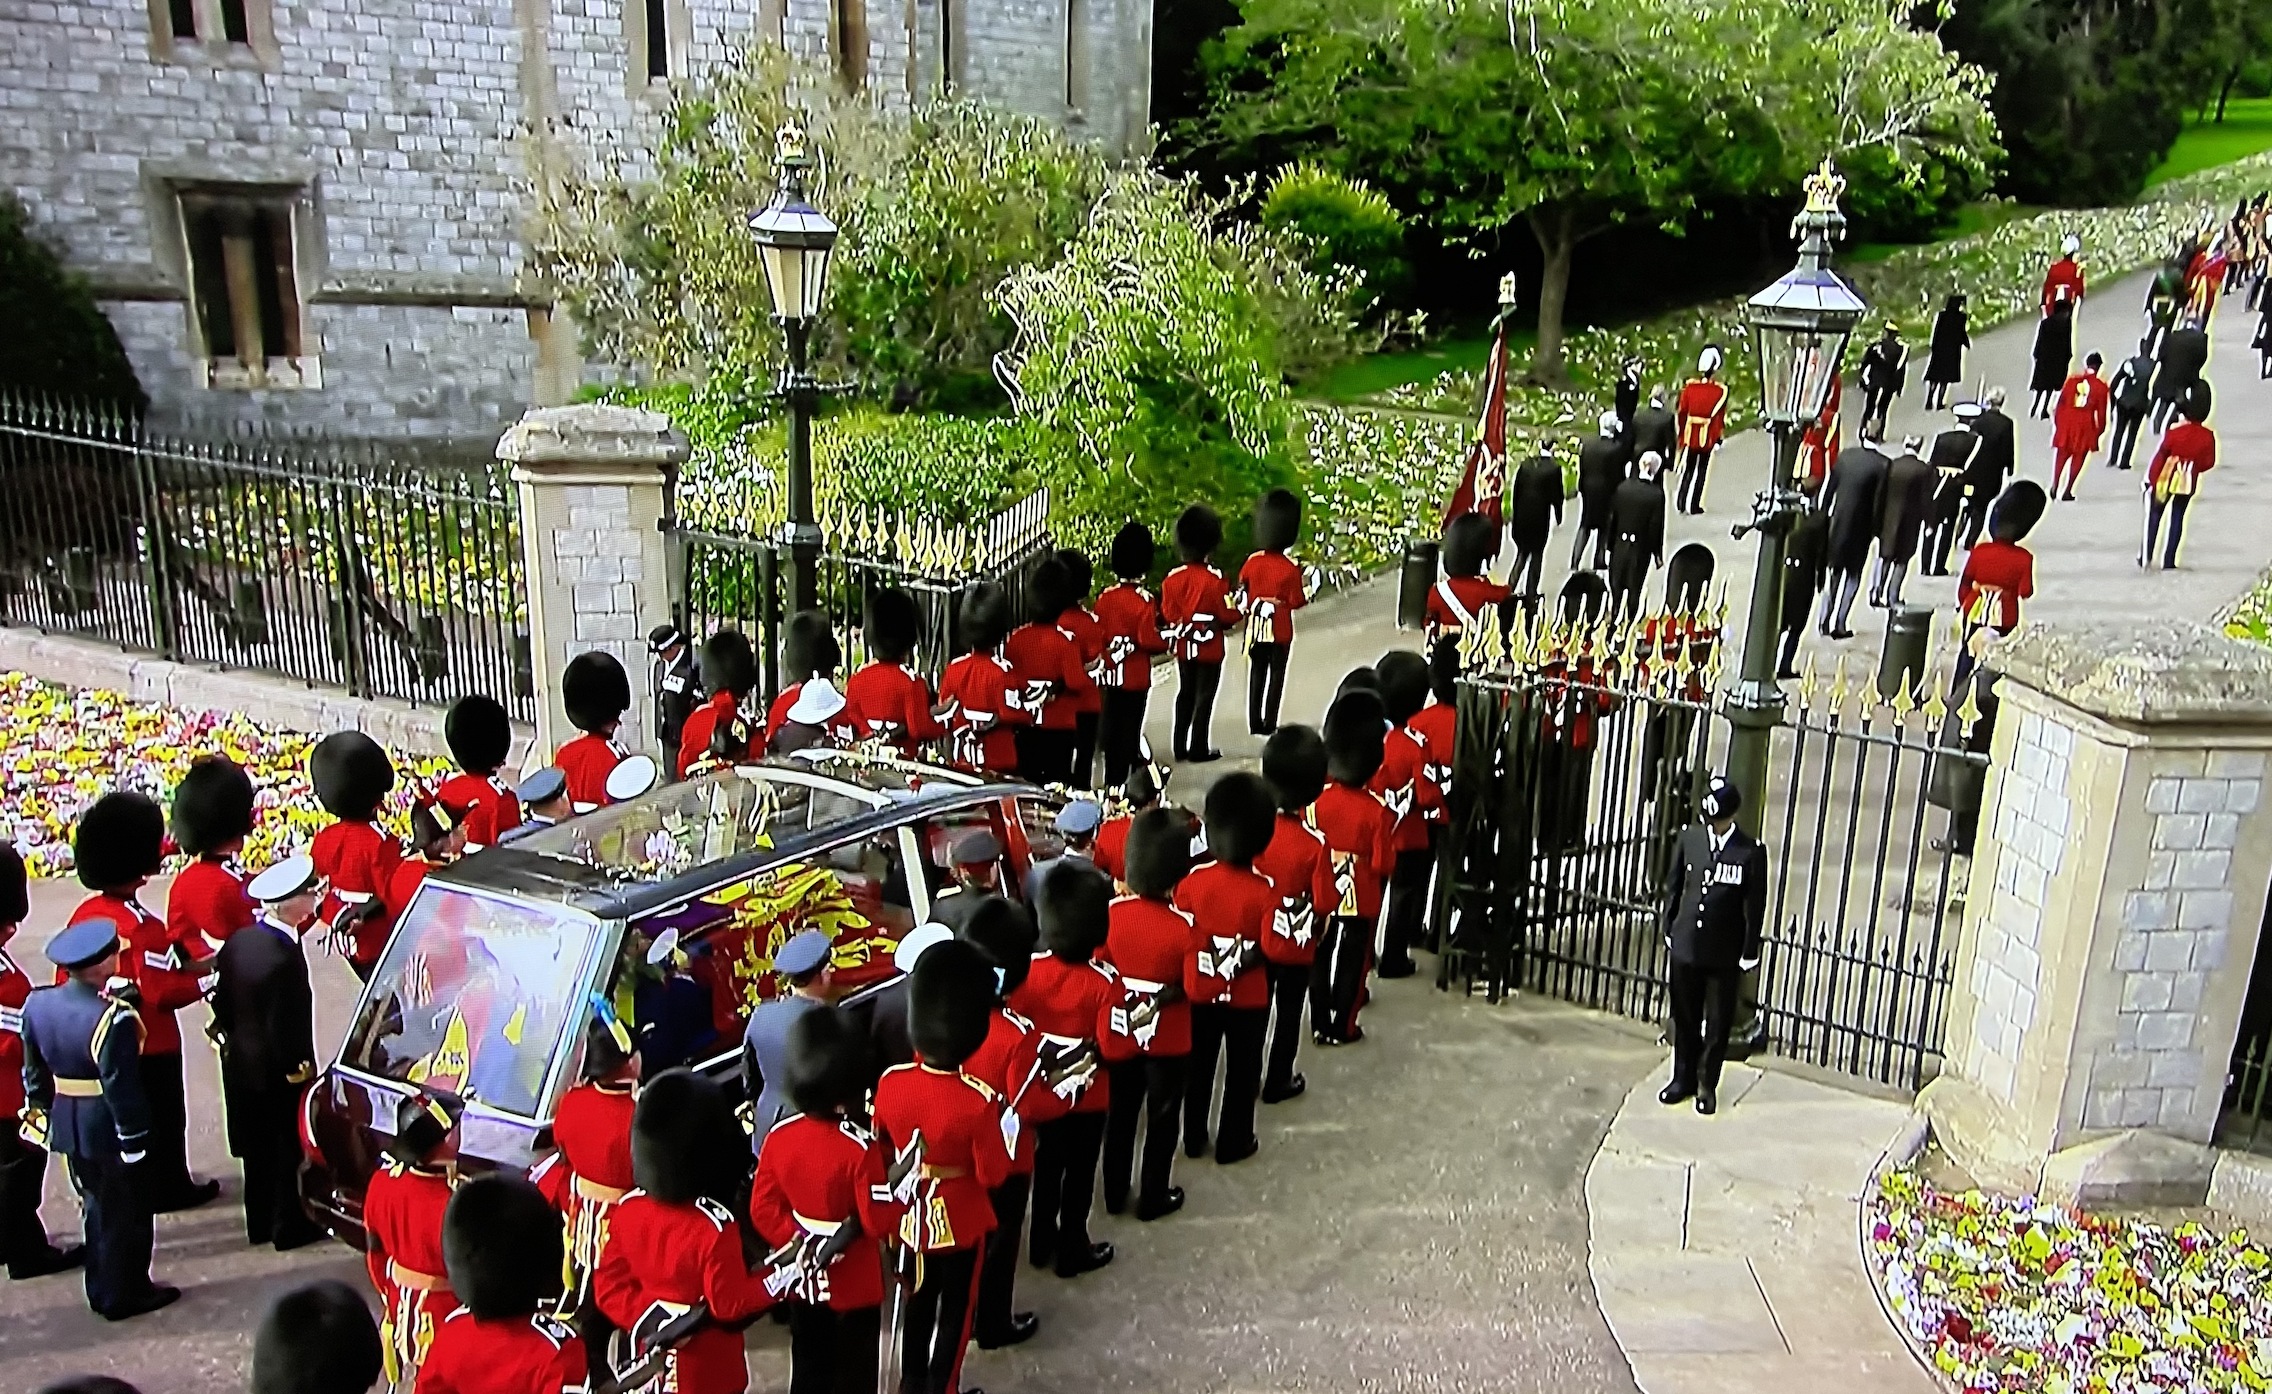 Queen's coffin procession at the gates of Windsor